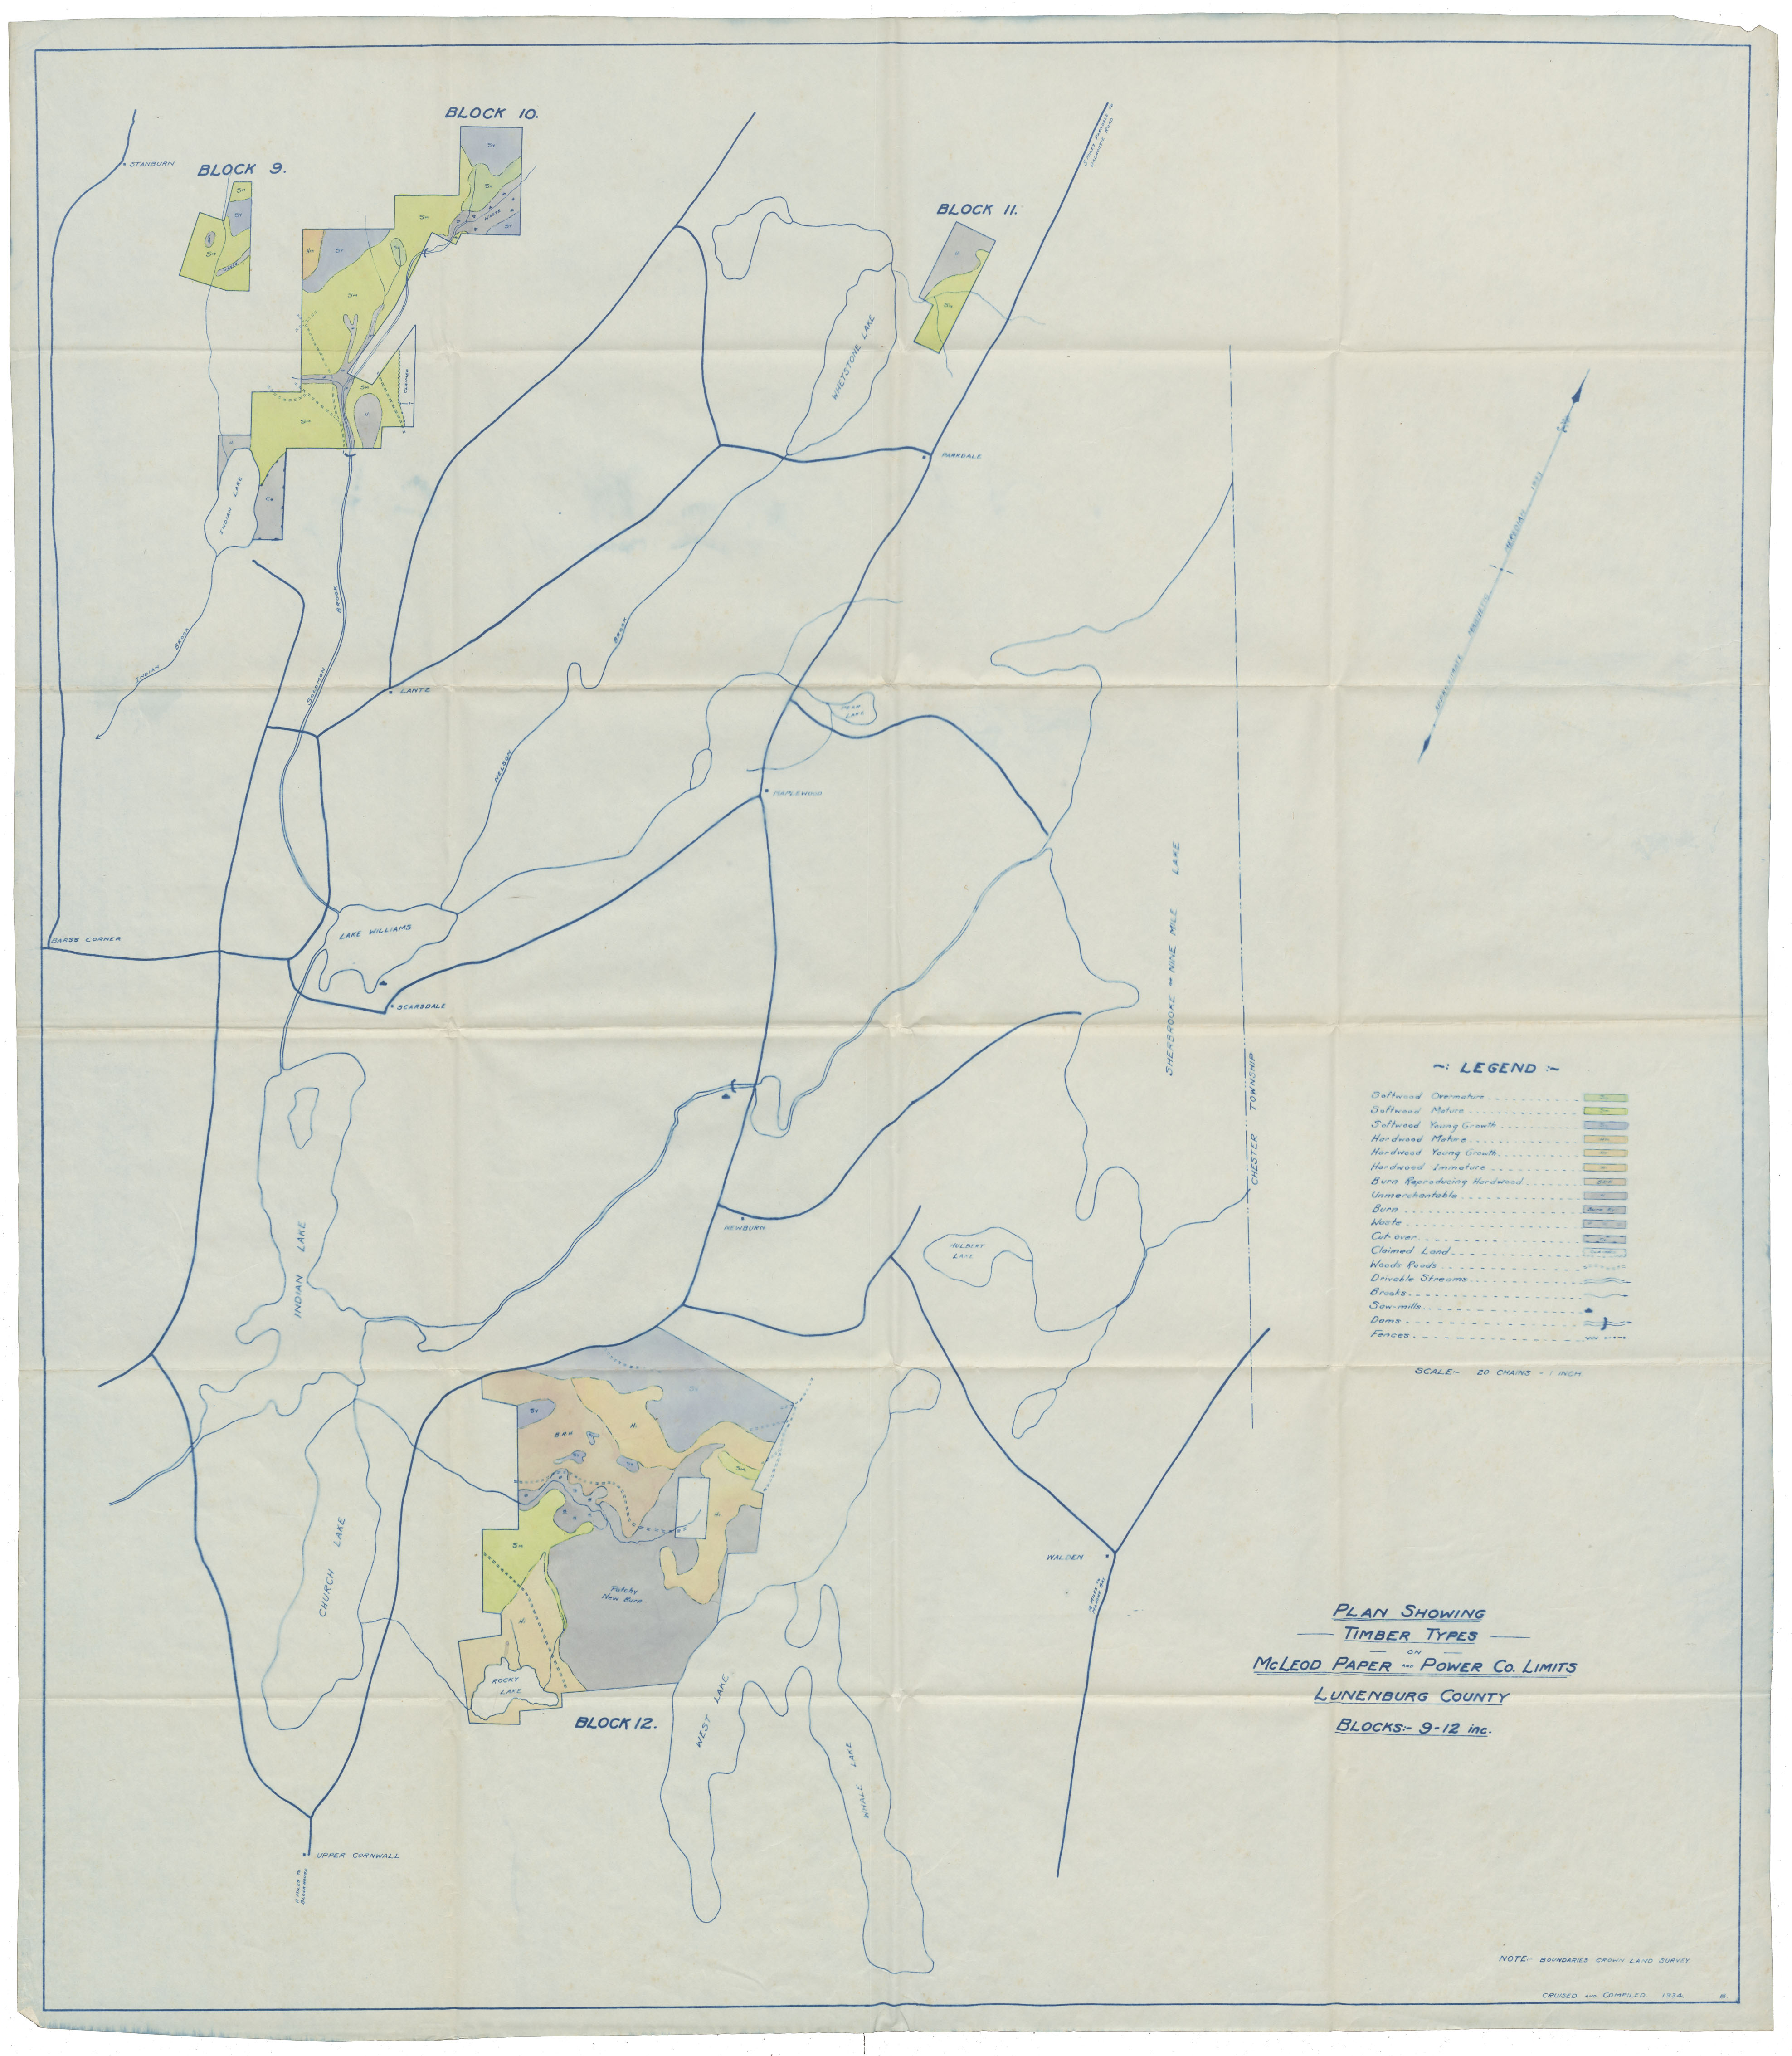 Plan showing Timber on McLeod Paper & Power Co, Lunenburg County Block 9-12 inc